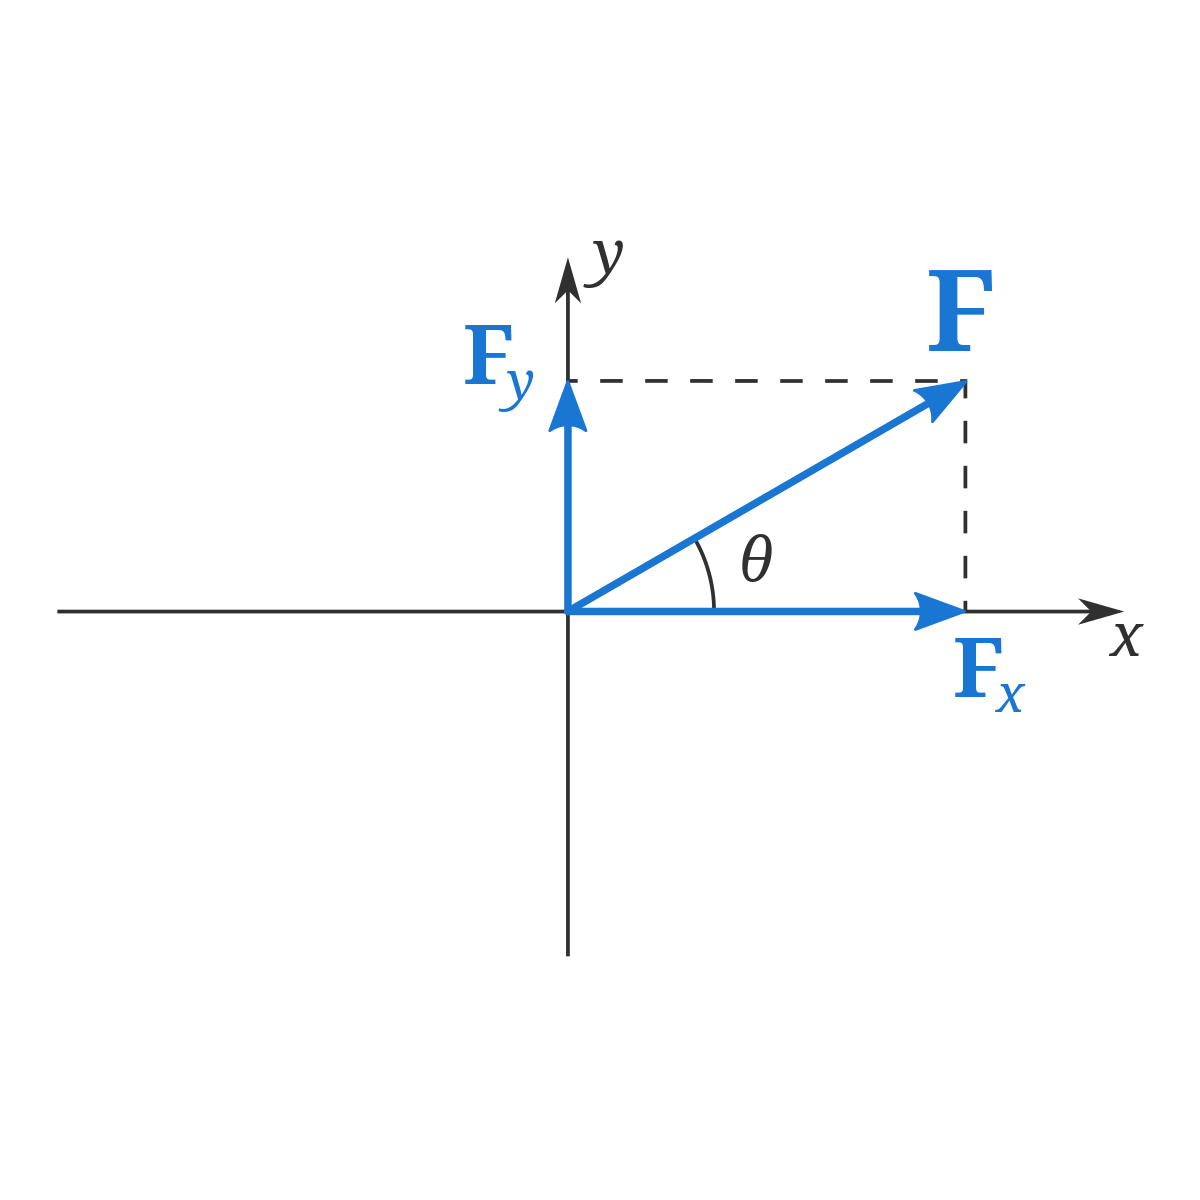 How to find the magnitude and direction of a force given the x and